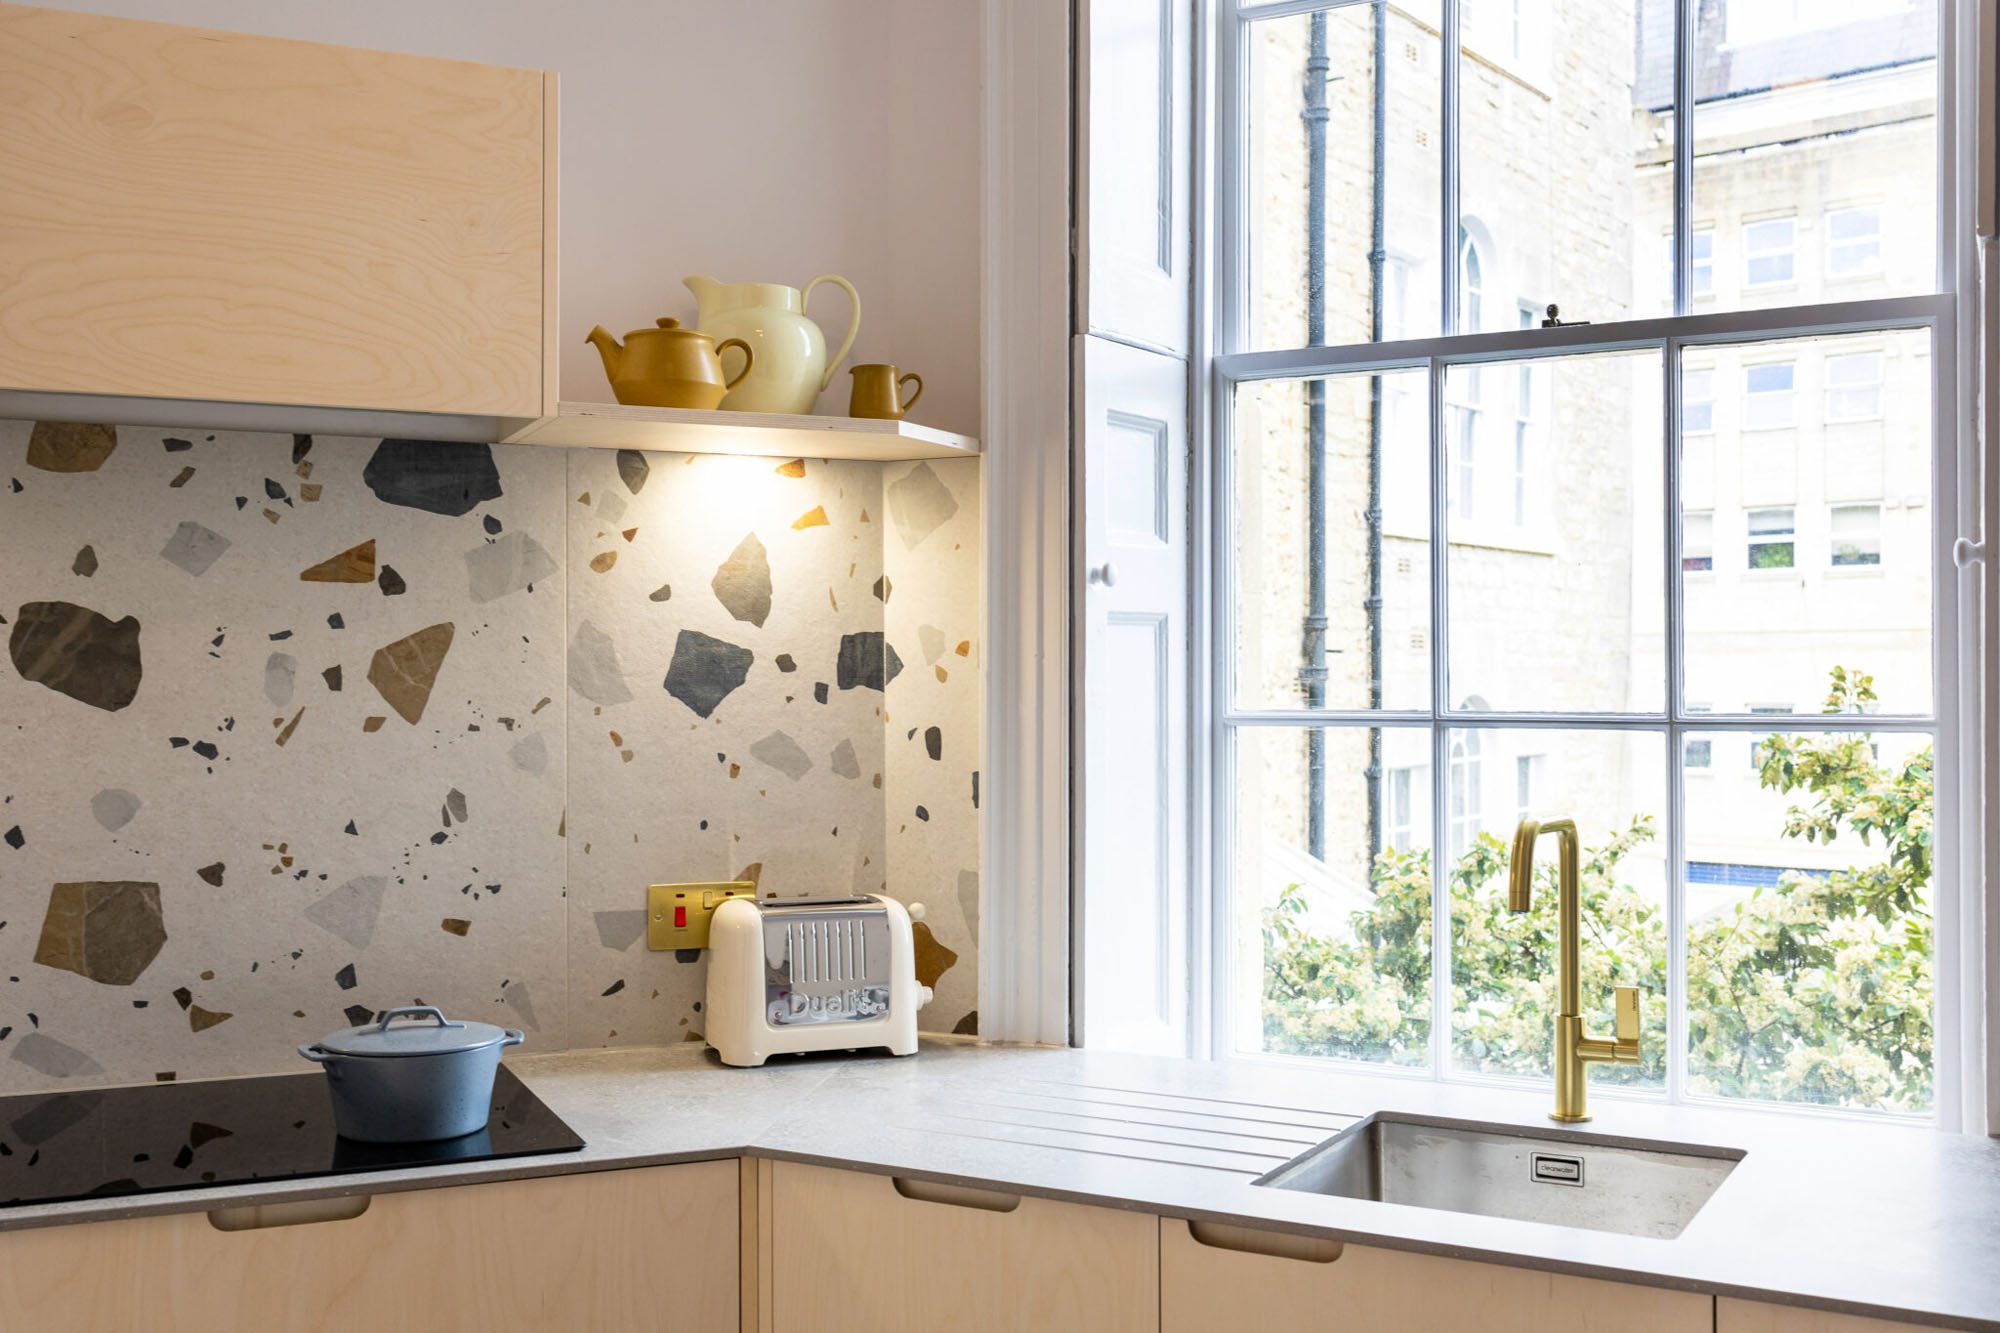 Husk's Writers Retreat Kitchen, which features plywood kitchen fronts and terrazzo tiling.